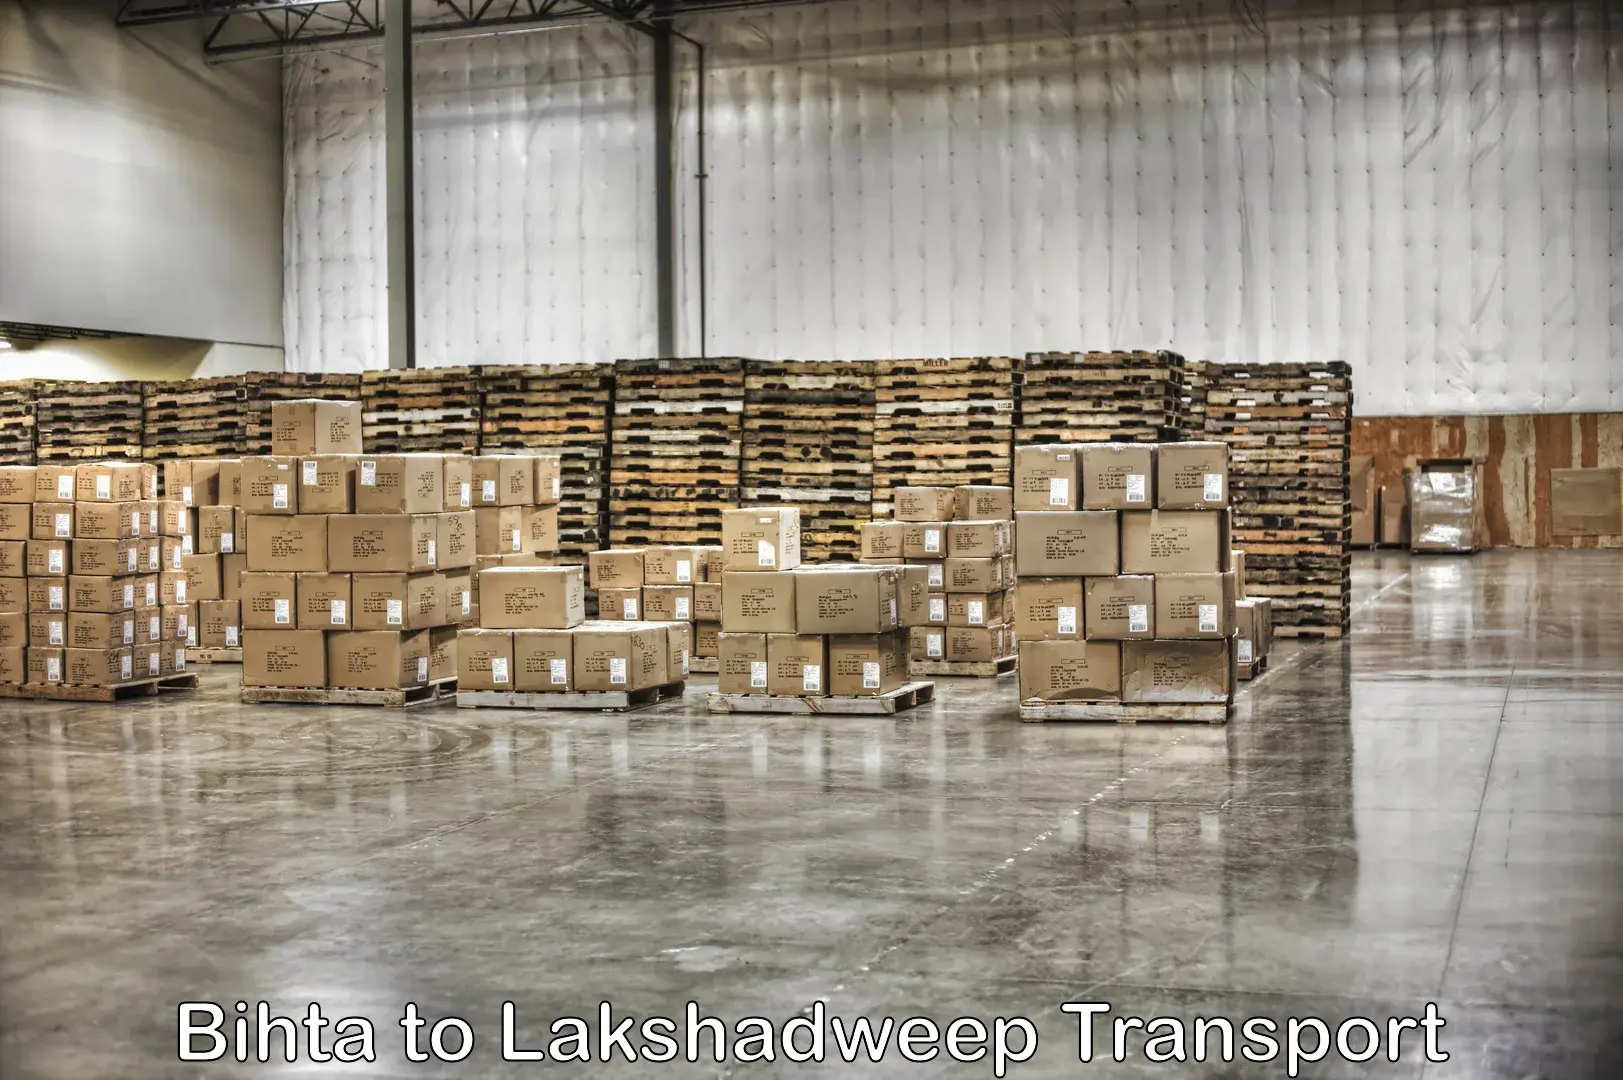 Container transport service in Bihta to Lakshadweep